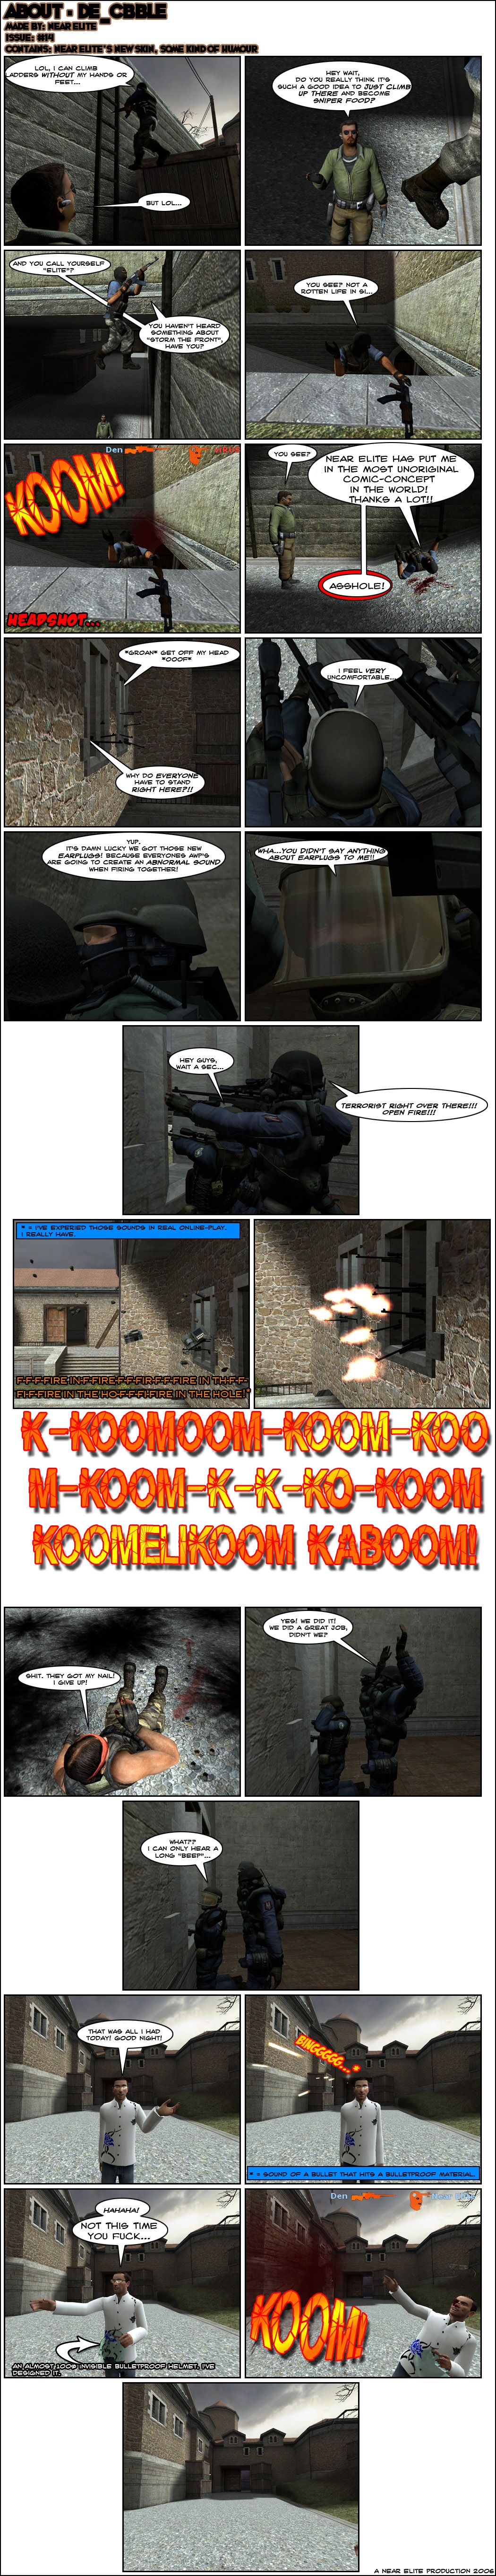 At the Cobble map of Counter-Strike: Source, a terrorist laughs that he can climb ladders without his hands or feet. Another laughs as well but asks him if he really thinks it's such a good idea to just climb there and become sniper food. The first terrorist notes sarcastically that the other calls himself elite and asks if he's heard about storming the front. The terrorist climbs up and starts to tell his friend there's not a rotten life in sight, but gets interrupted by a headshot. The other terrorist tells him see and the dying terrorist screams that Near Elite has put him in the most unoriginal comic concept in the world, thanks a lot. On the other side of the map, a dozen counter-terrorists are huddled together on two small windows, one groaning to get off his head and another angrily asking why everyone has to stand right there. One counter-terrorist notes that he feels very uncomfortable and another says it's lucky they have those new earplugs because everyone's AWP sniper rifles are going to create an abnormal sound when fired together. The other counter-terrorist shouts that he didn't say anything about earplugs to him and tries to tell the others to wait a sec, but one of them spots terrorists and orders open fire. The terrorists all throw bombs and grenades, creating a lag of fire in the hole screams, while all counter-terrorists fire all at once. A series of explosions follows and one terrorist on the ground declares that they got his nail and gives up. One of the counter-terrorists celebrates their win and says they did a great job, but the one withour earplugs asks what and says he can only hear a long beep. Near Elite then says it's all he had today and bids goodnight, but someone fires at his head. However, the bullet hits an almost 100% invisible bulletproof helmet and ricochets. Near takes off his helmet and gloats not this time, you fucker, but then gets shot in the head and dies. The end.